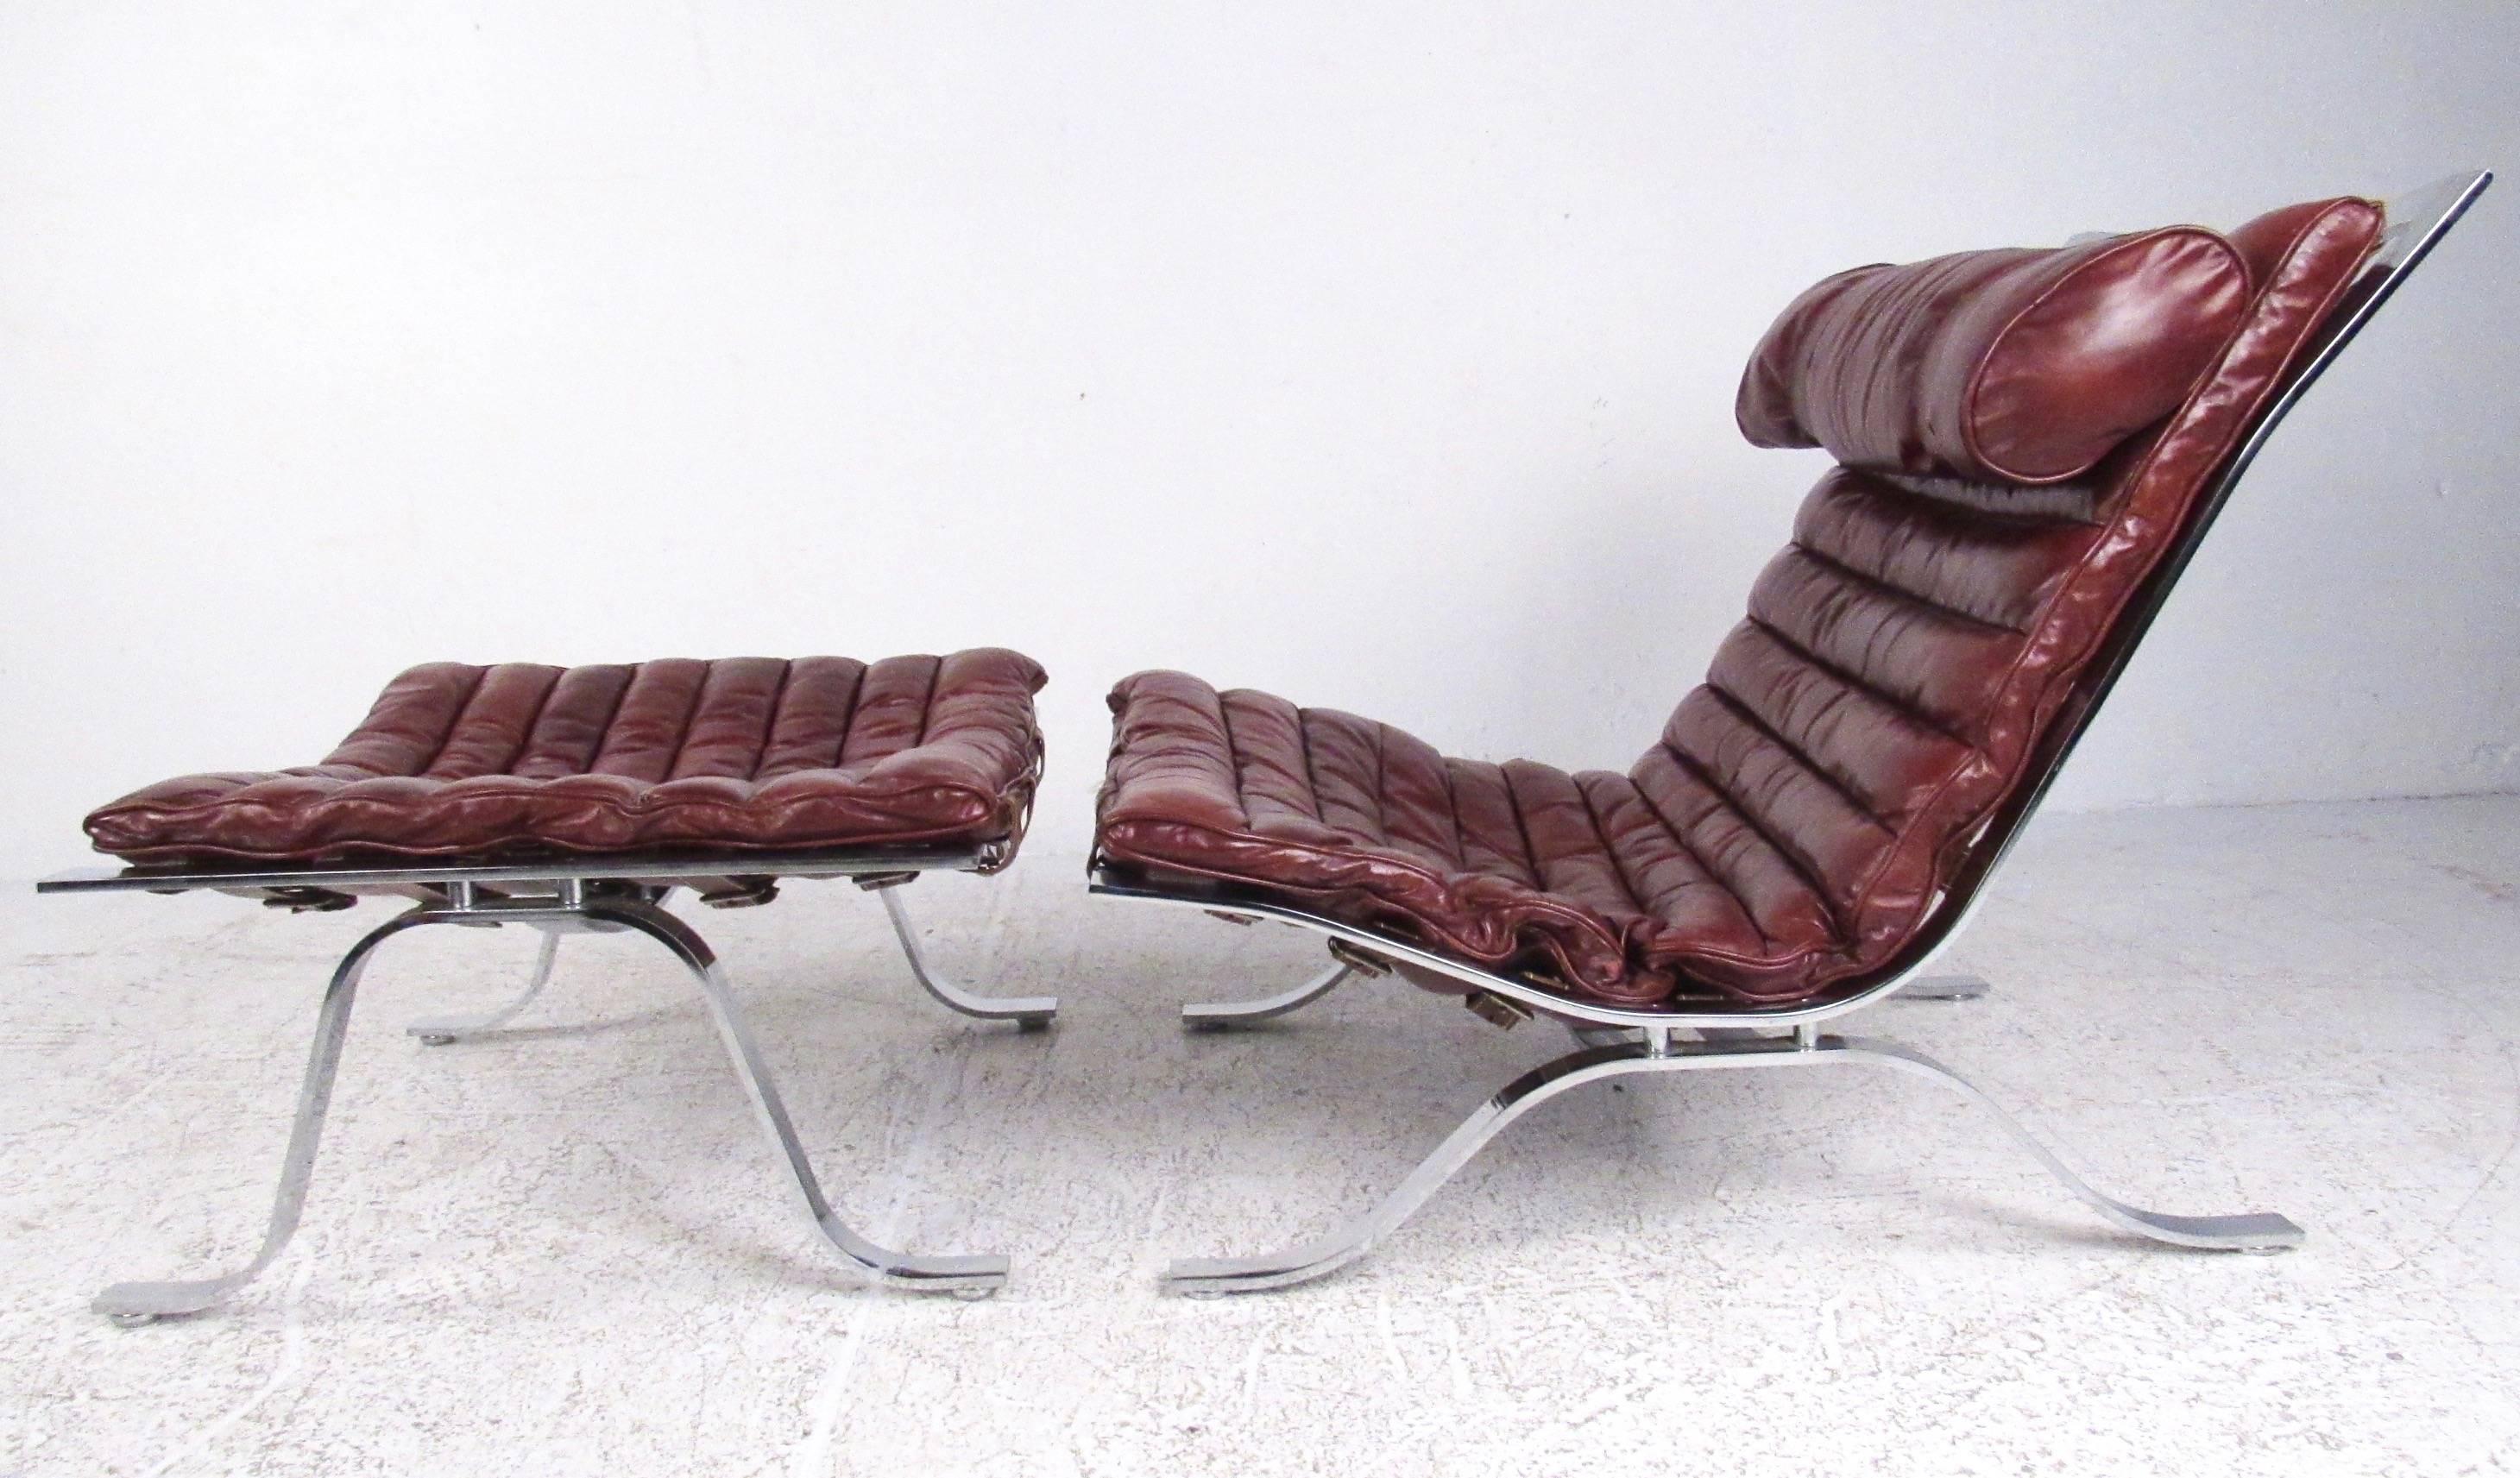 This quality midcentury Swedish lounge chair features comfortable ribbed leather upholstery, matched head rest, and heavy chrome construction. Matching ottoman adds to the comfort of this mid century modern slipper chair, perfect for home or